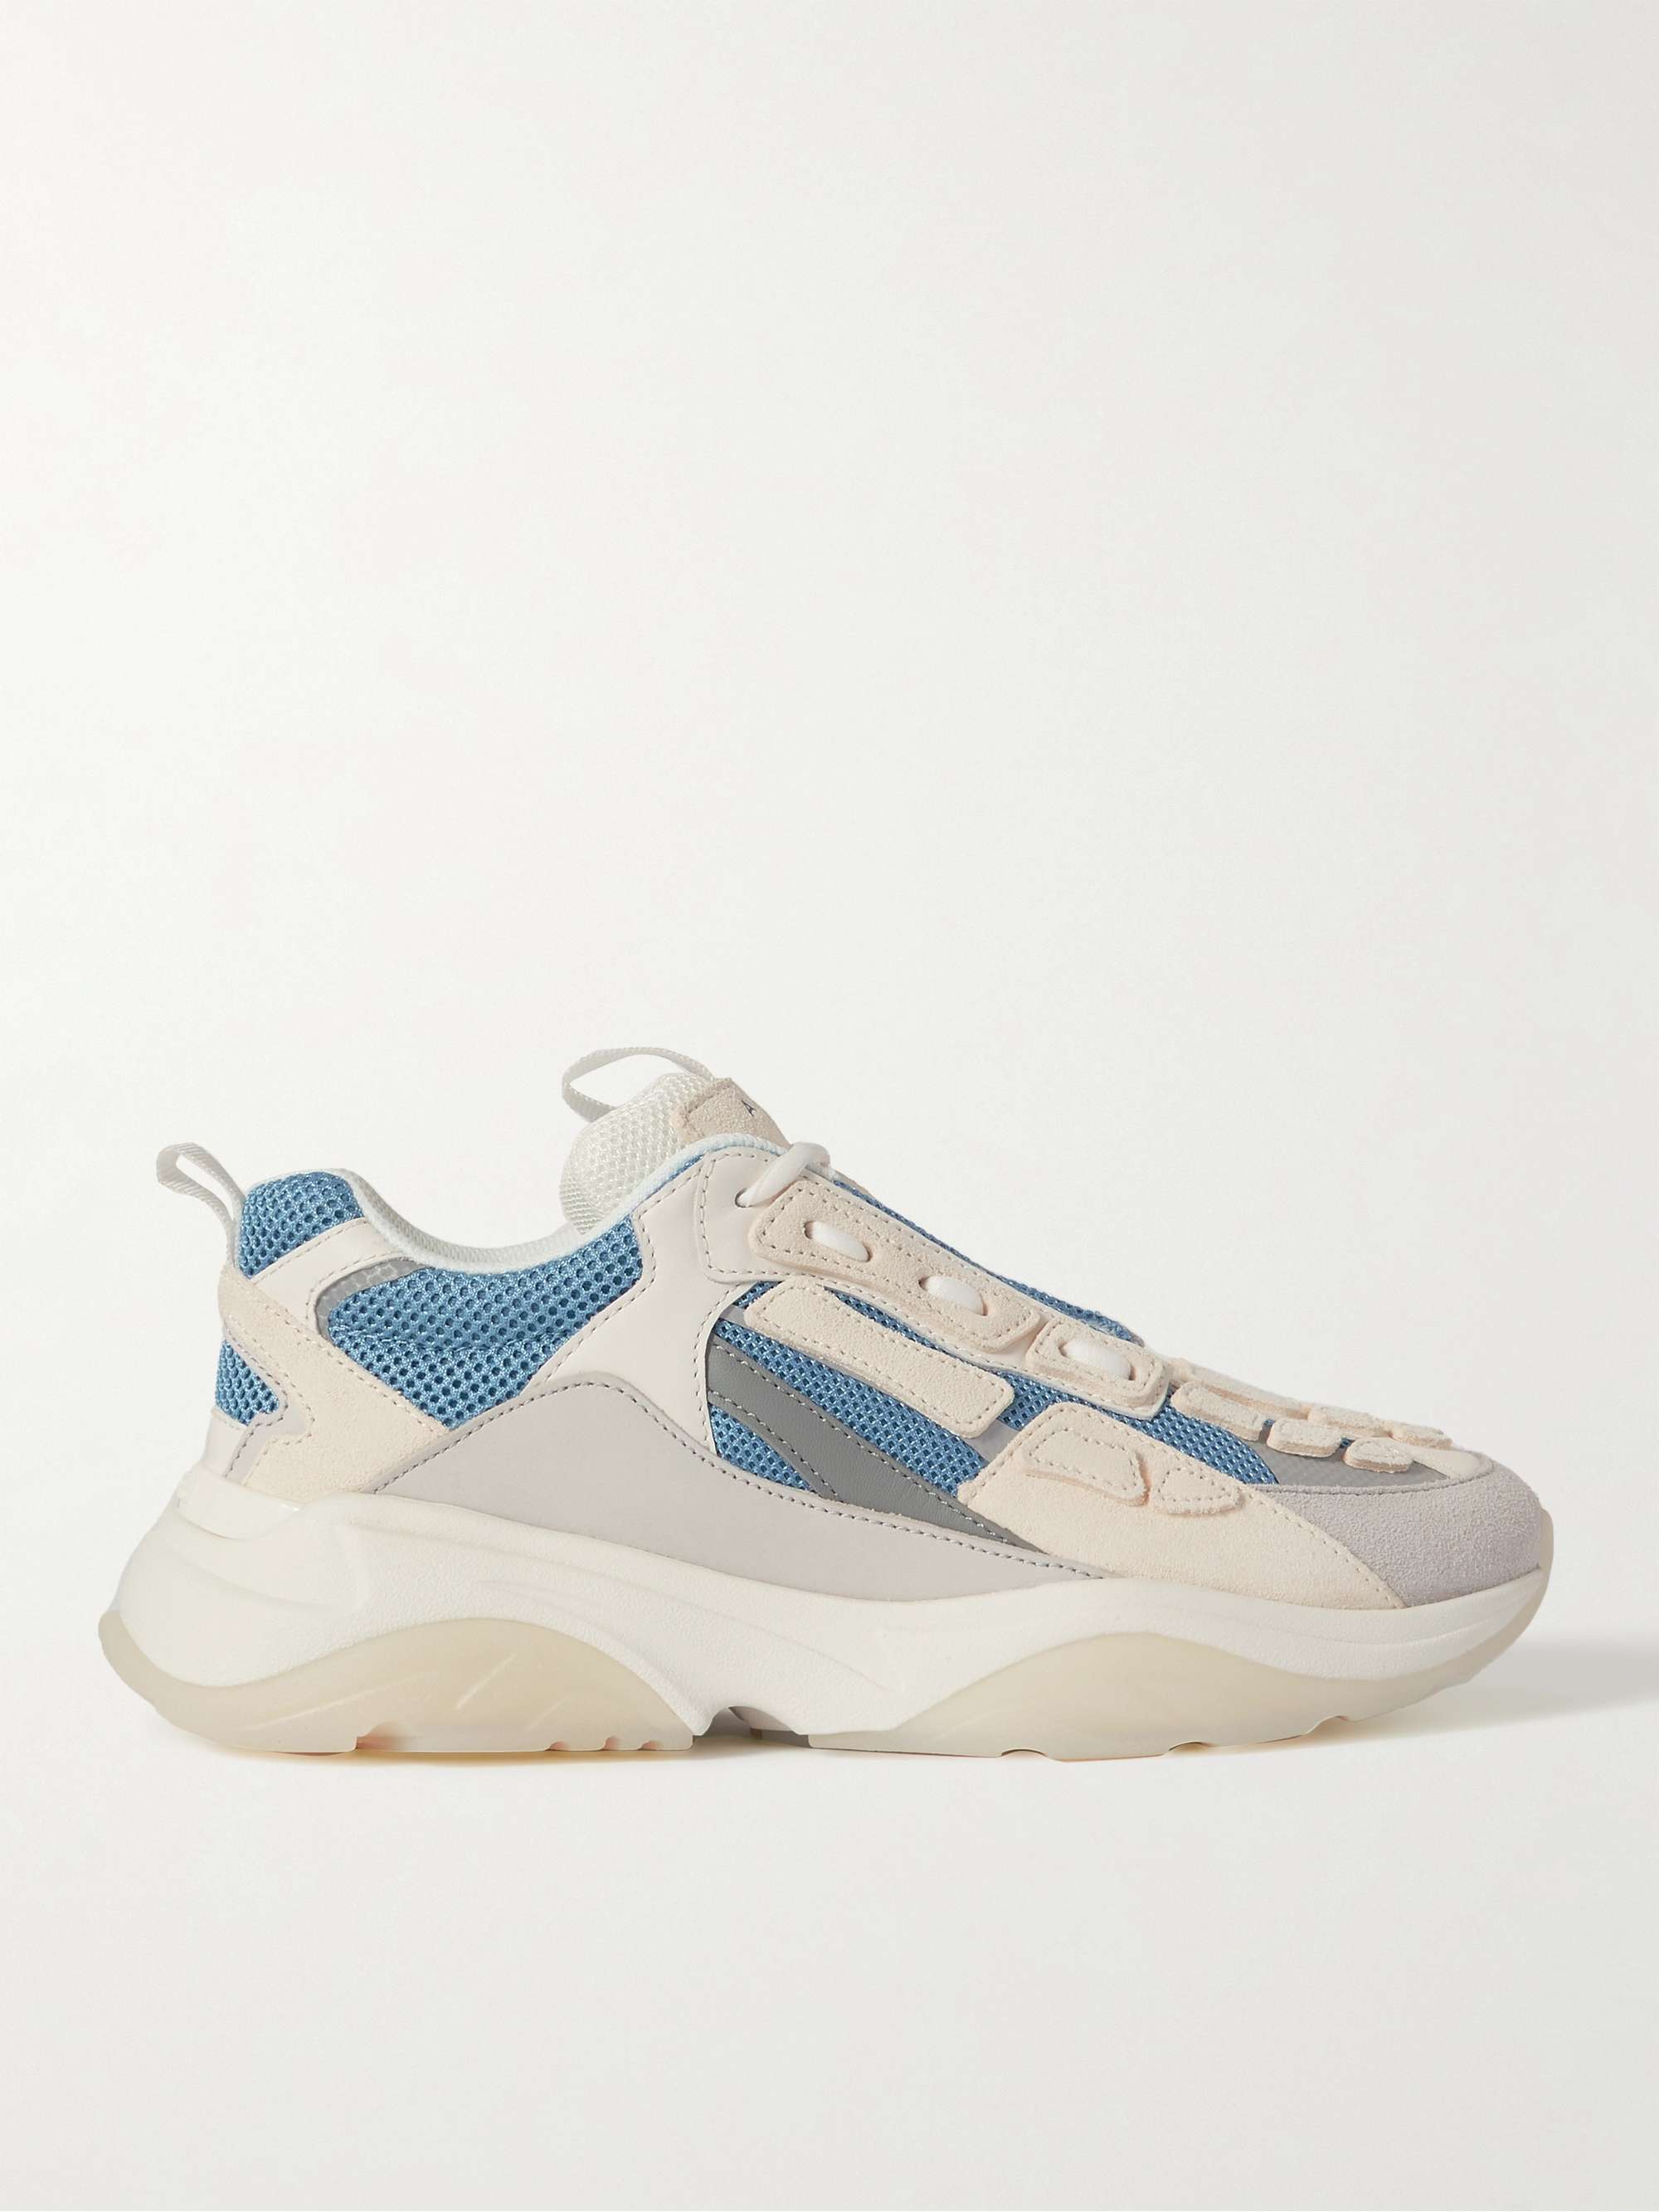 AMIRI Bone Runner Leather and Suede-Trimmed Mesh Sneakers